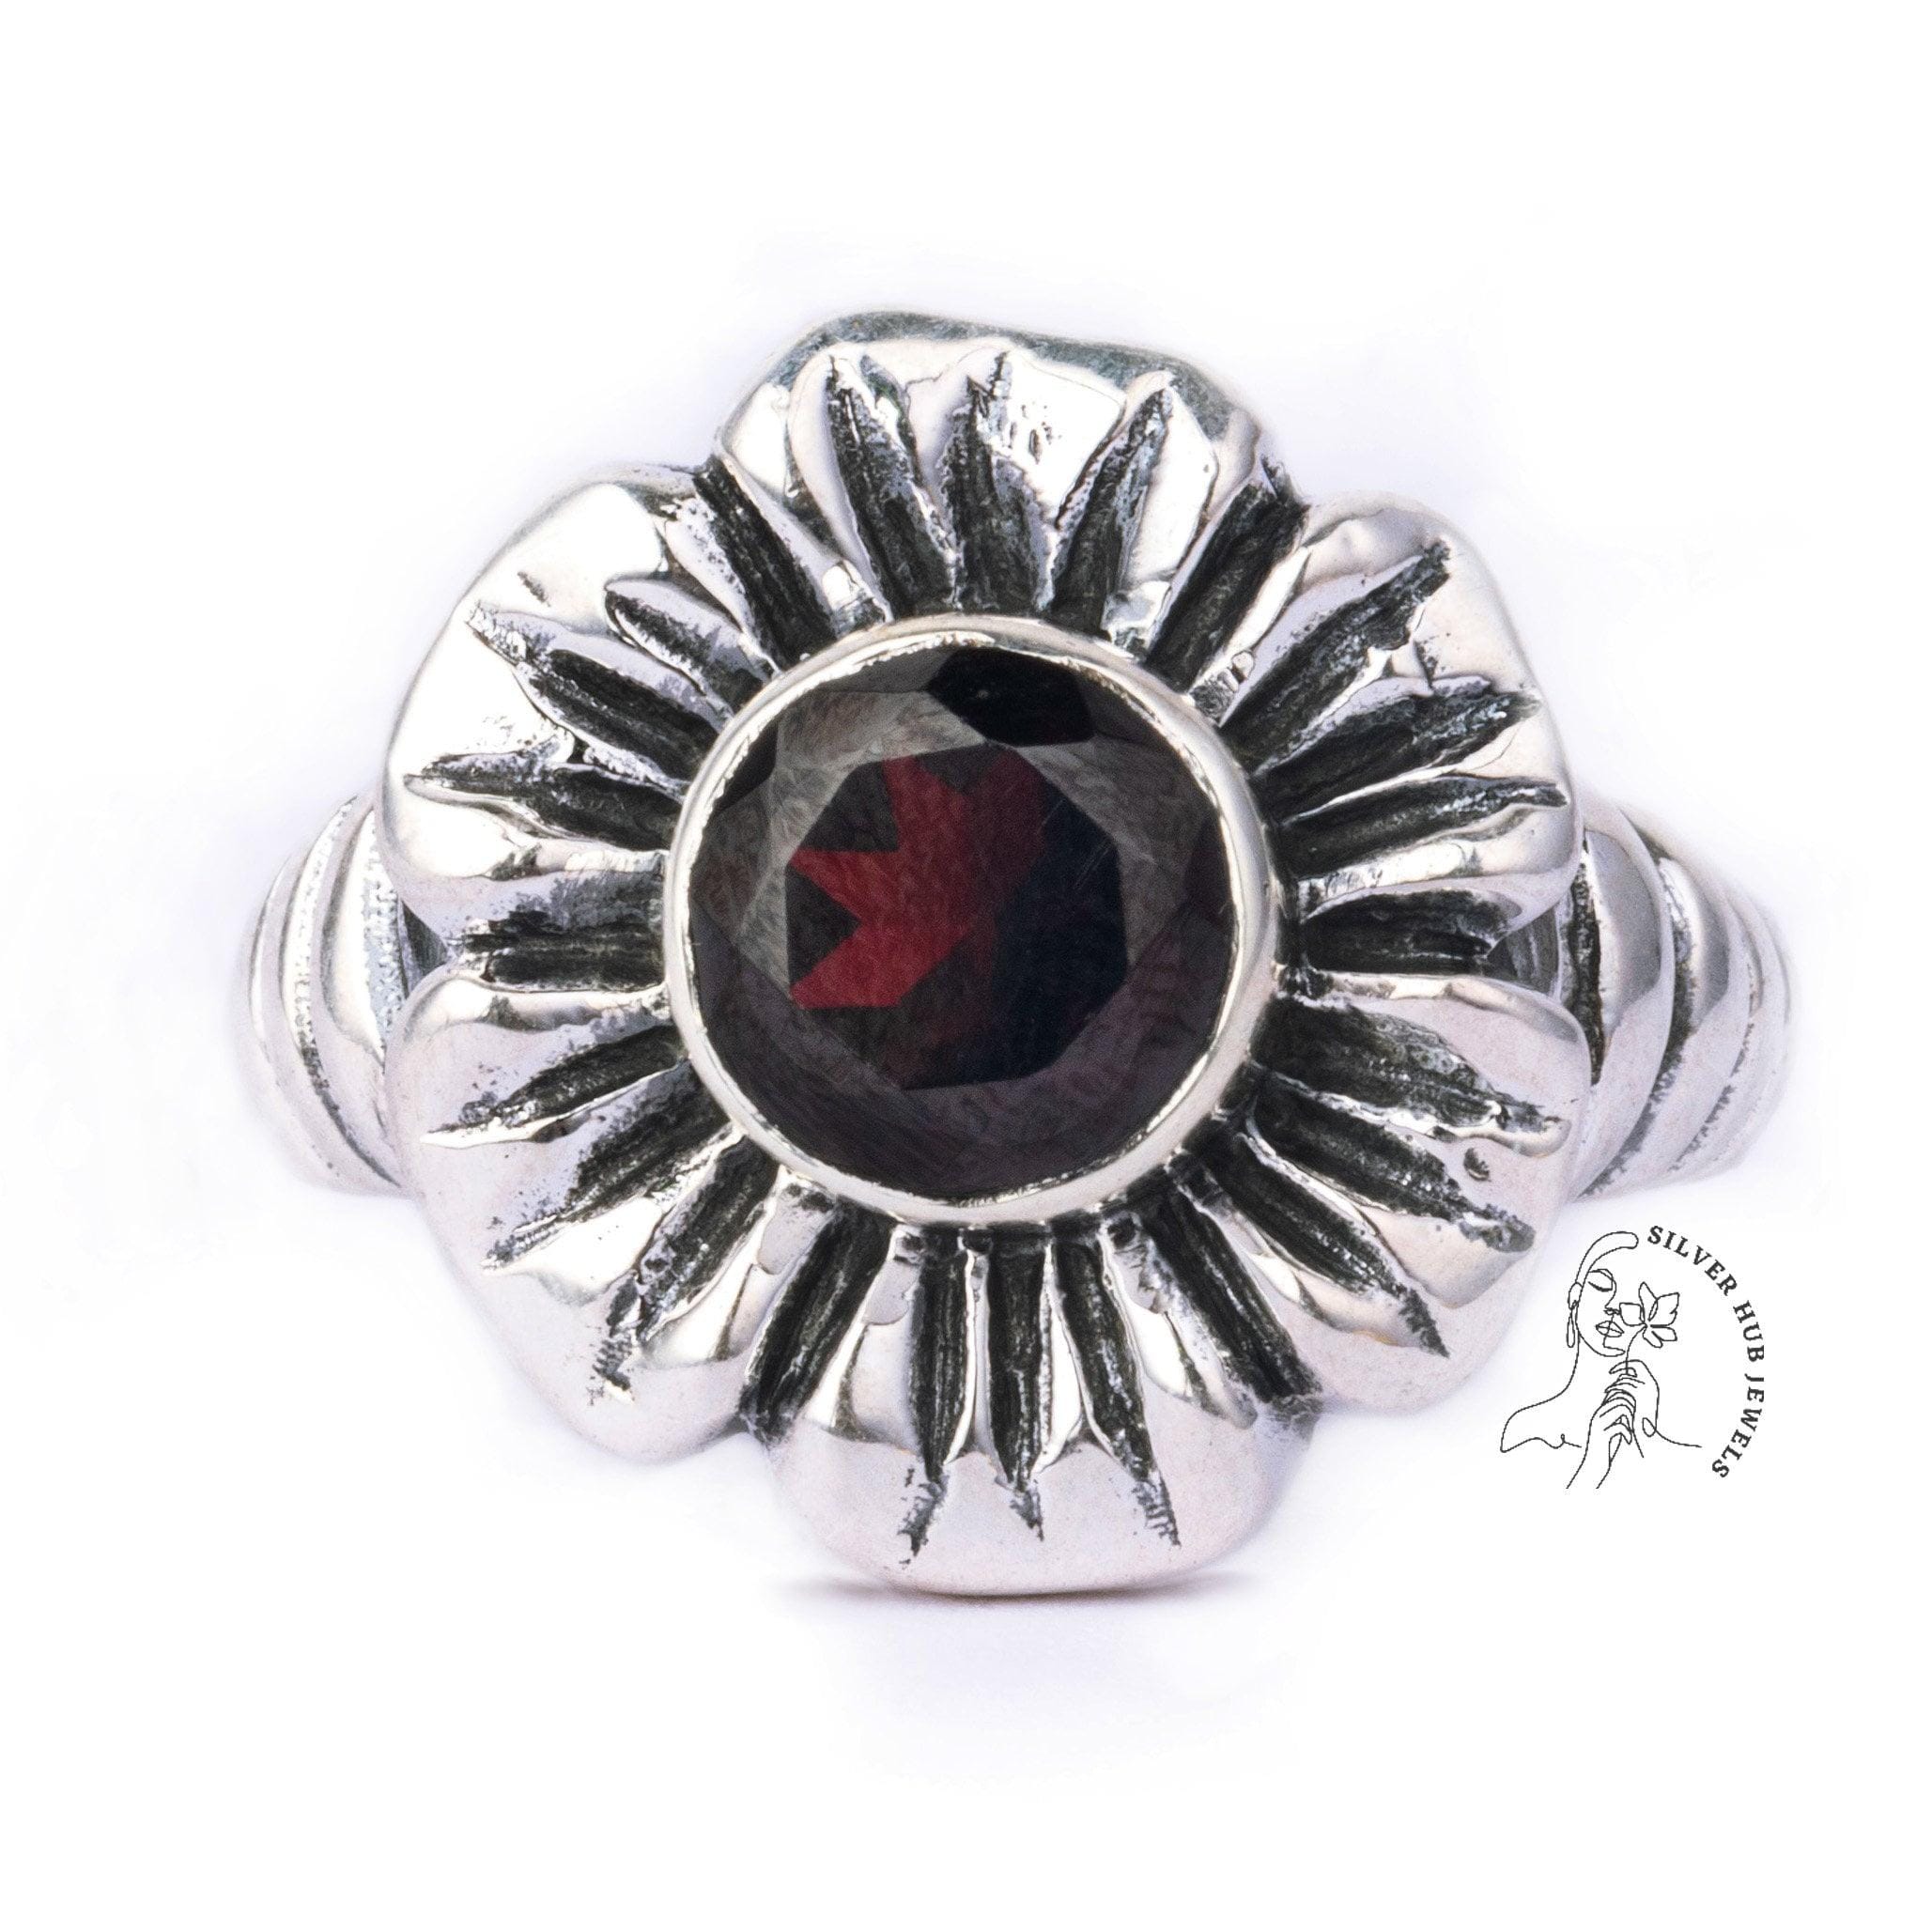 Vintage Sterling Silver Round Shape flower ring-Family birthstone ring-Boho Ring-Natural Gemstone Ring-Multi stone Ring-Gift for mom - Silverhubjewels